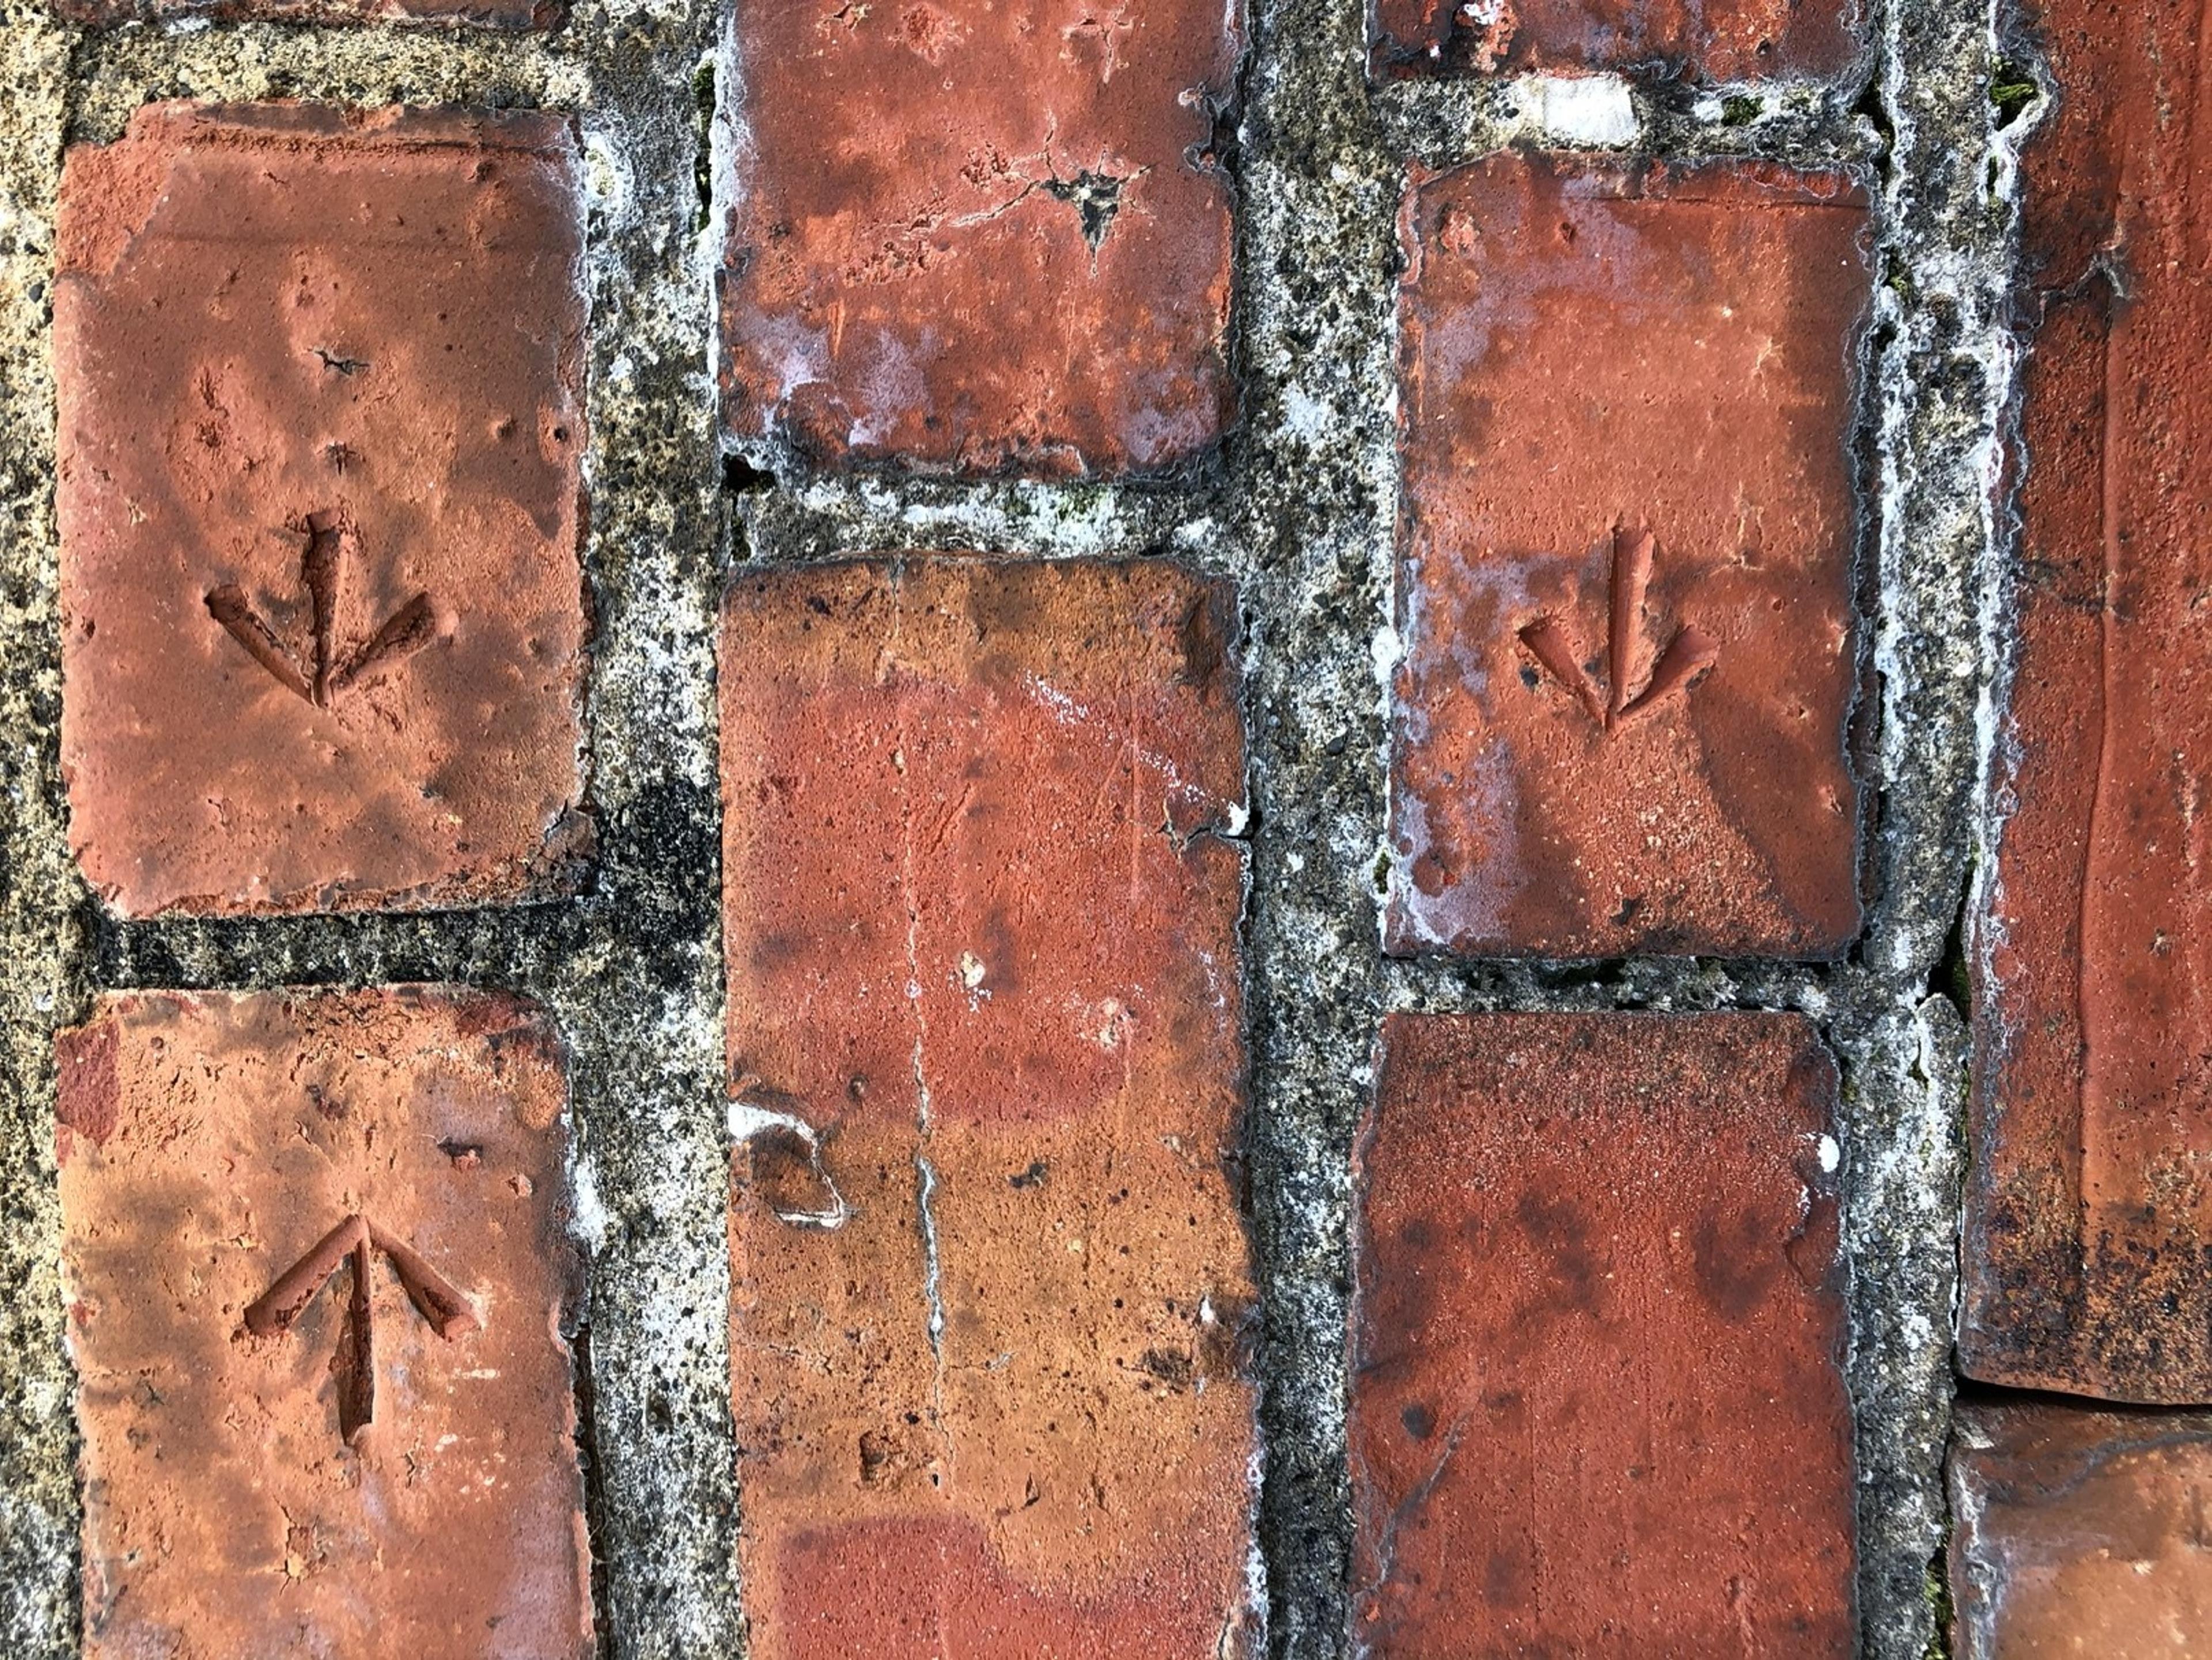 Detail of brick wall, arrows directing up and down carved into bricks.